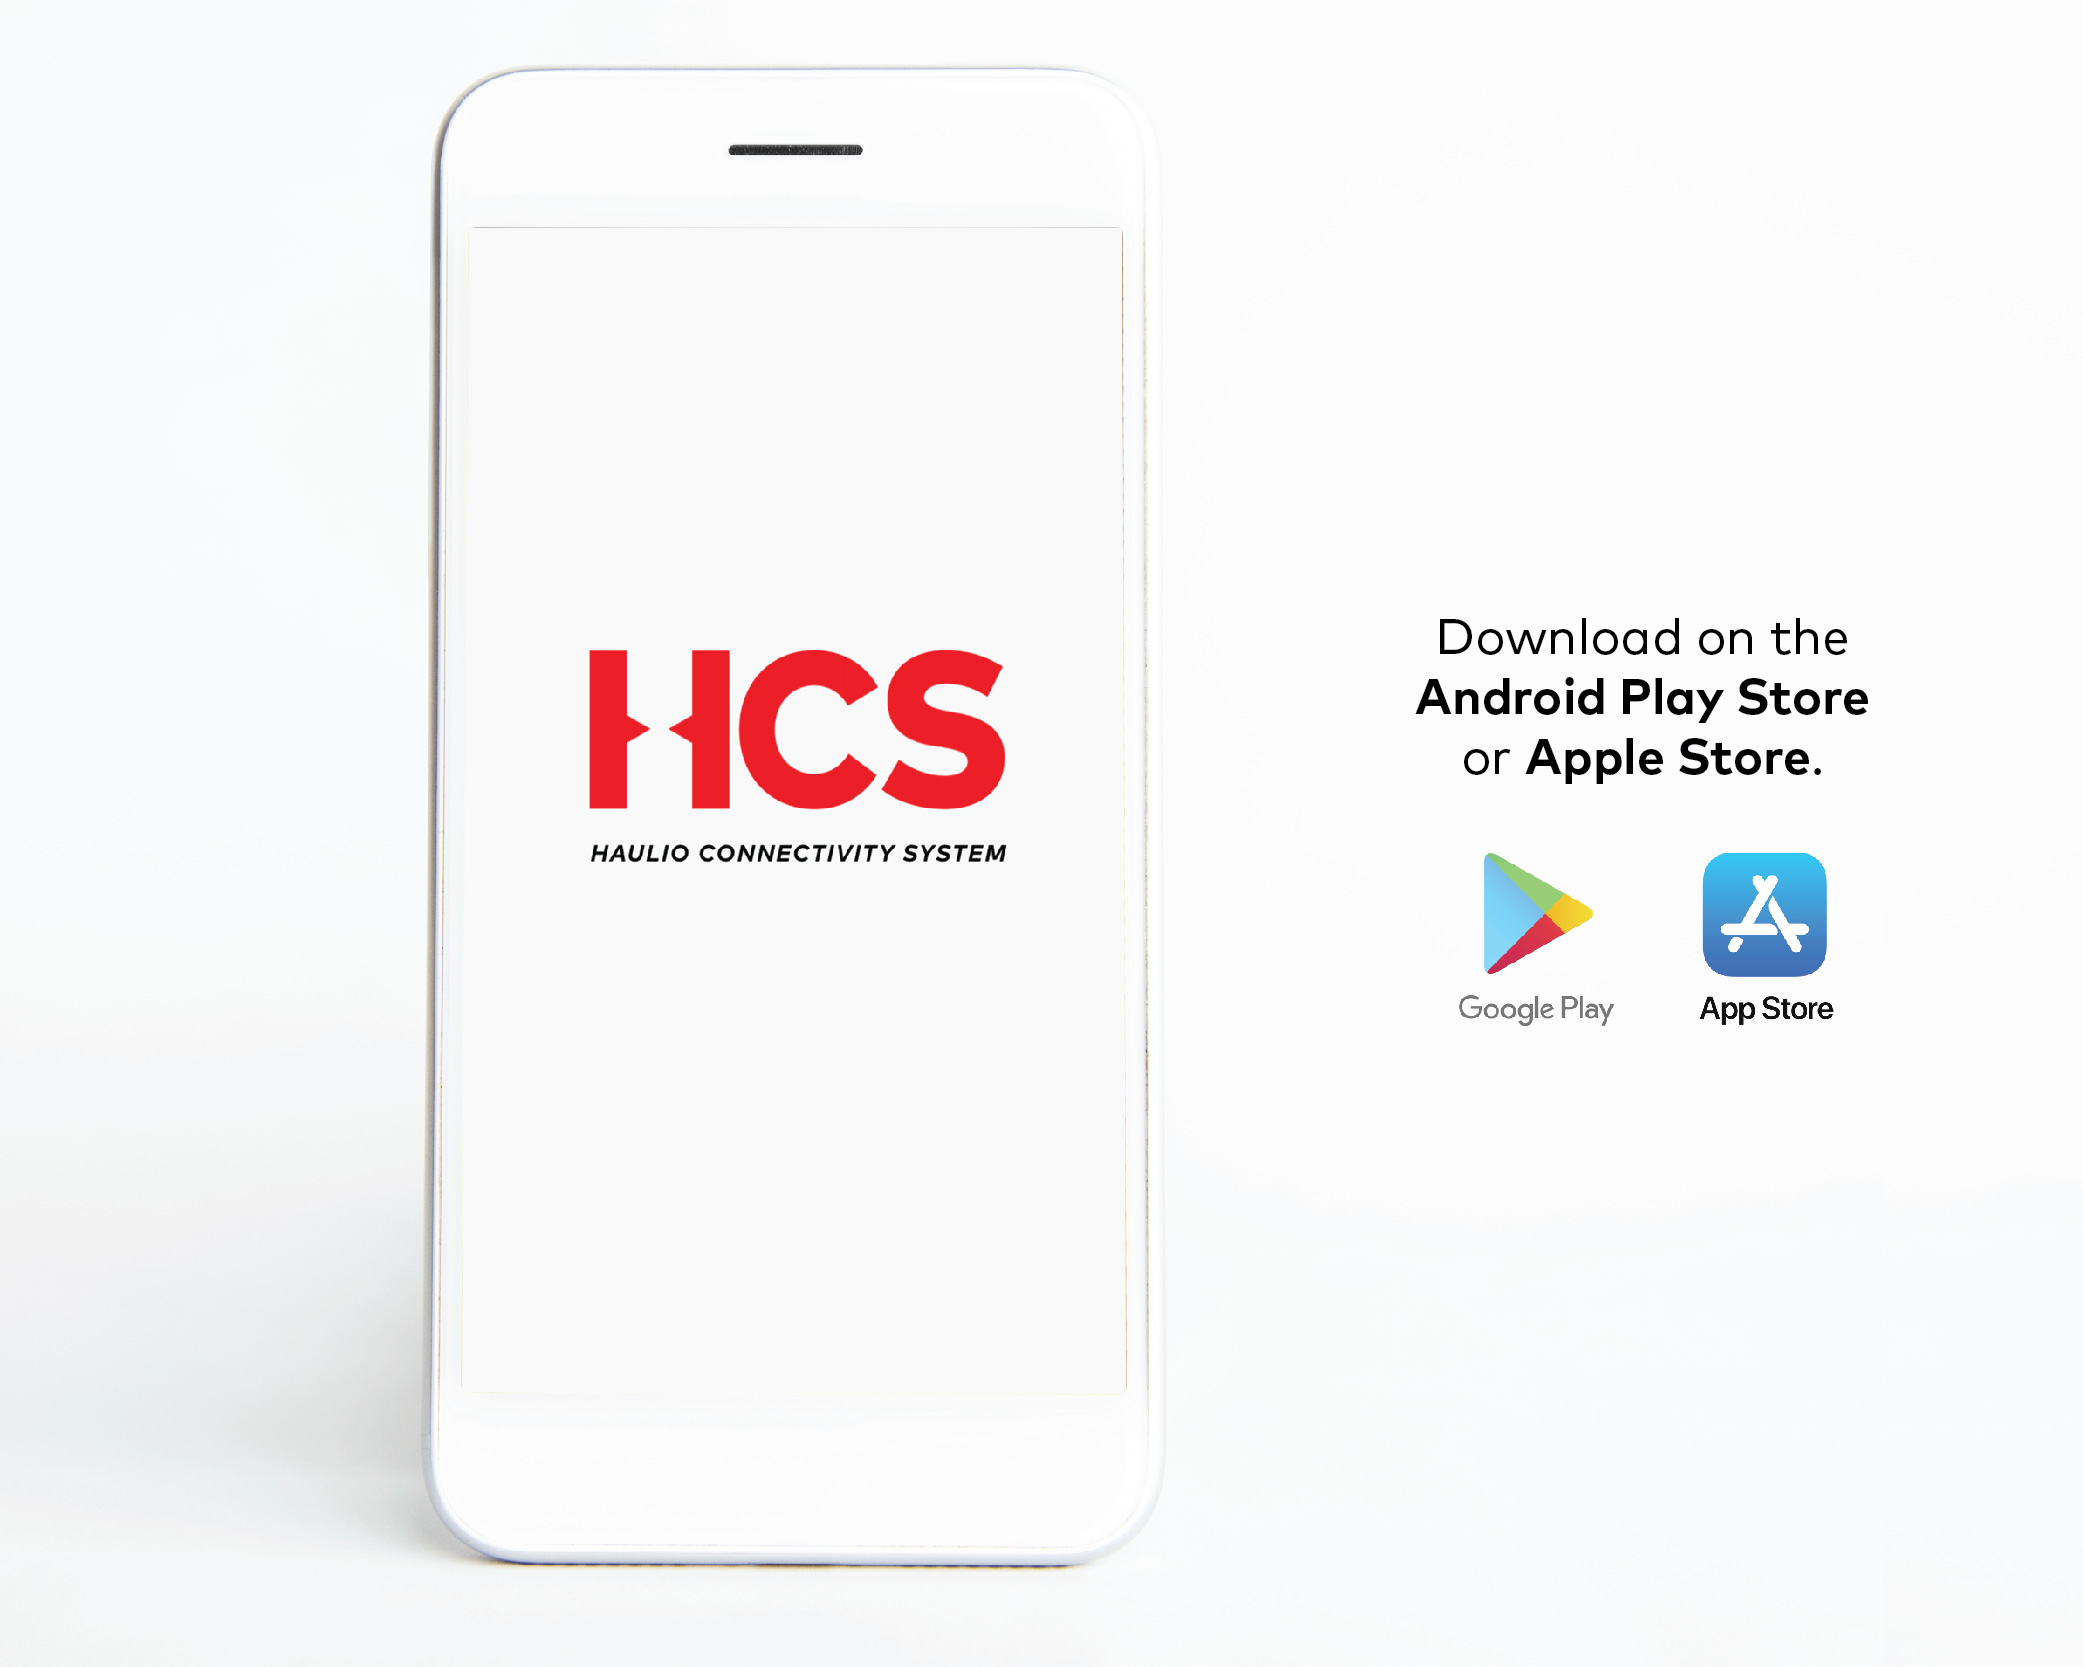 Download HCS on the Android Play Store and Apple Store